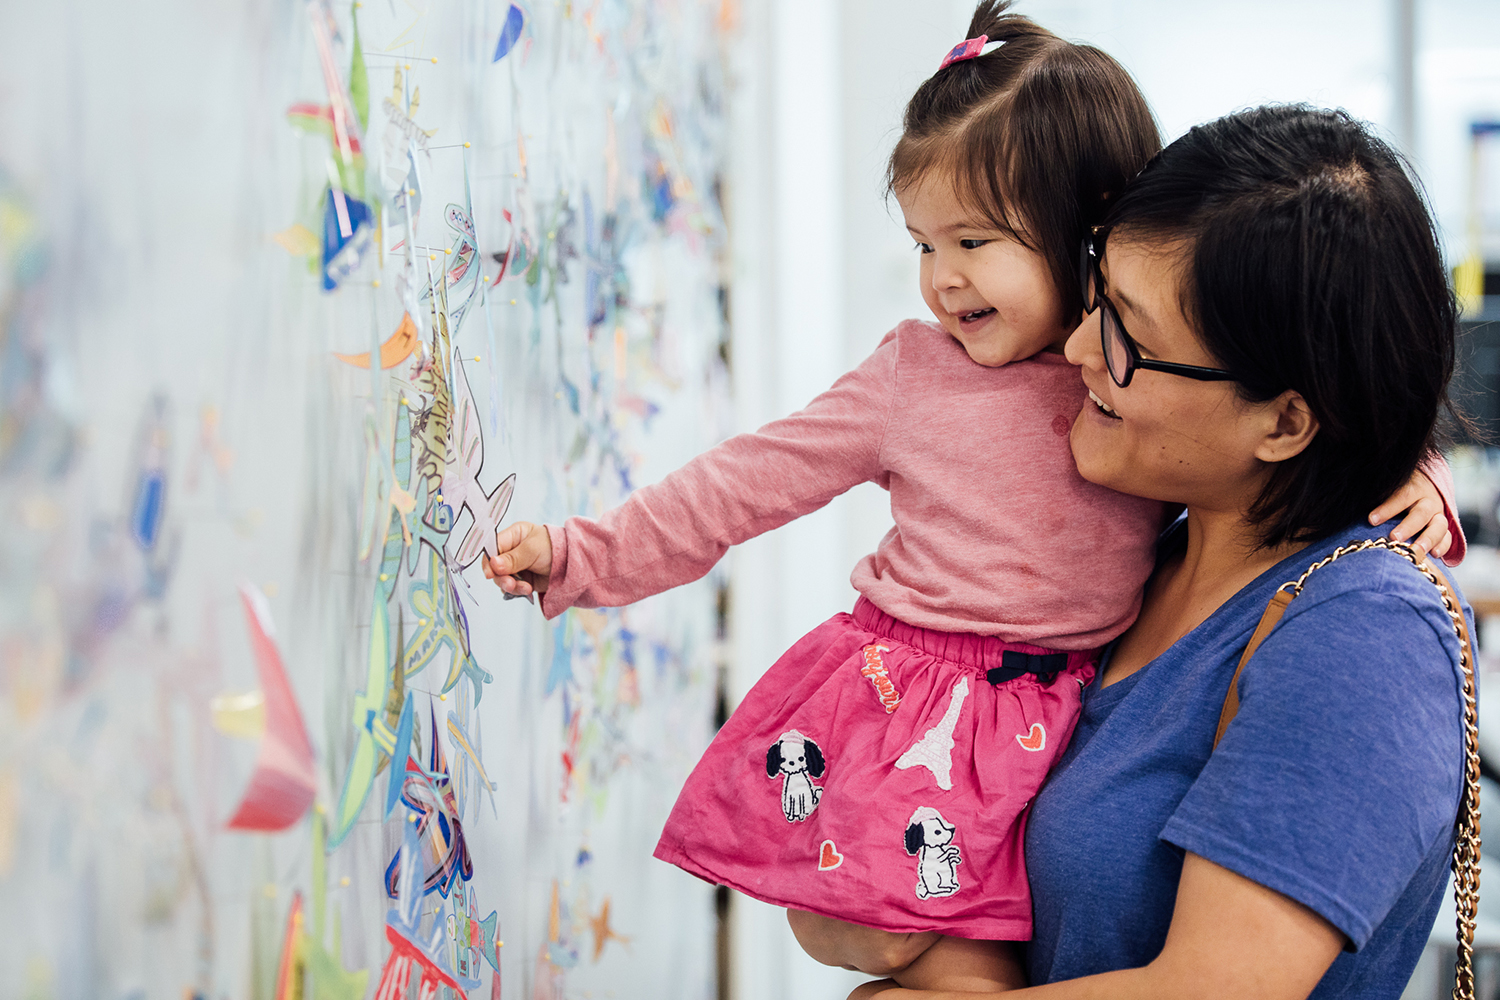 A parent holds their child as they examine interactive artwork